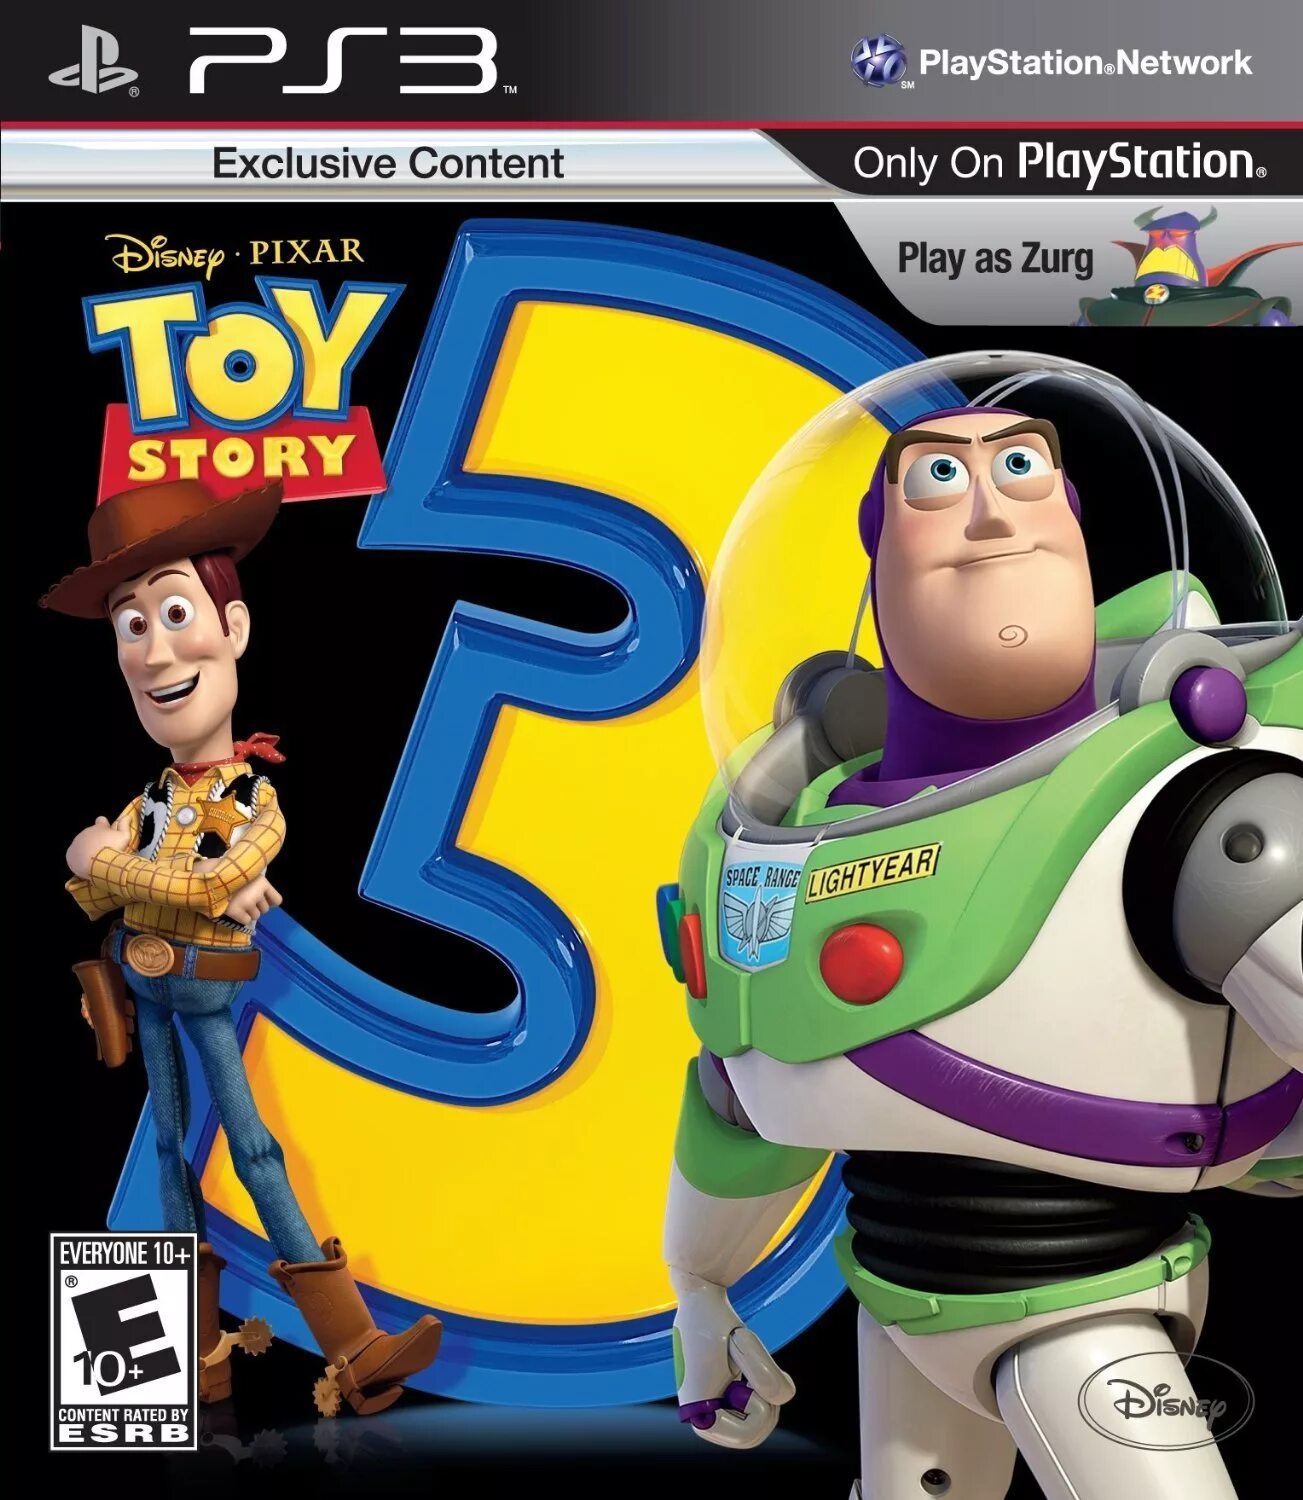 Toy story 3 ps3 обложка. Toy story 3 the videogame ps3 обложка. Игры ps3 Toy story 3. Toy story 3 PLAYSTATION 3. Игры игрушки 3 играть